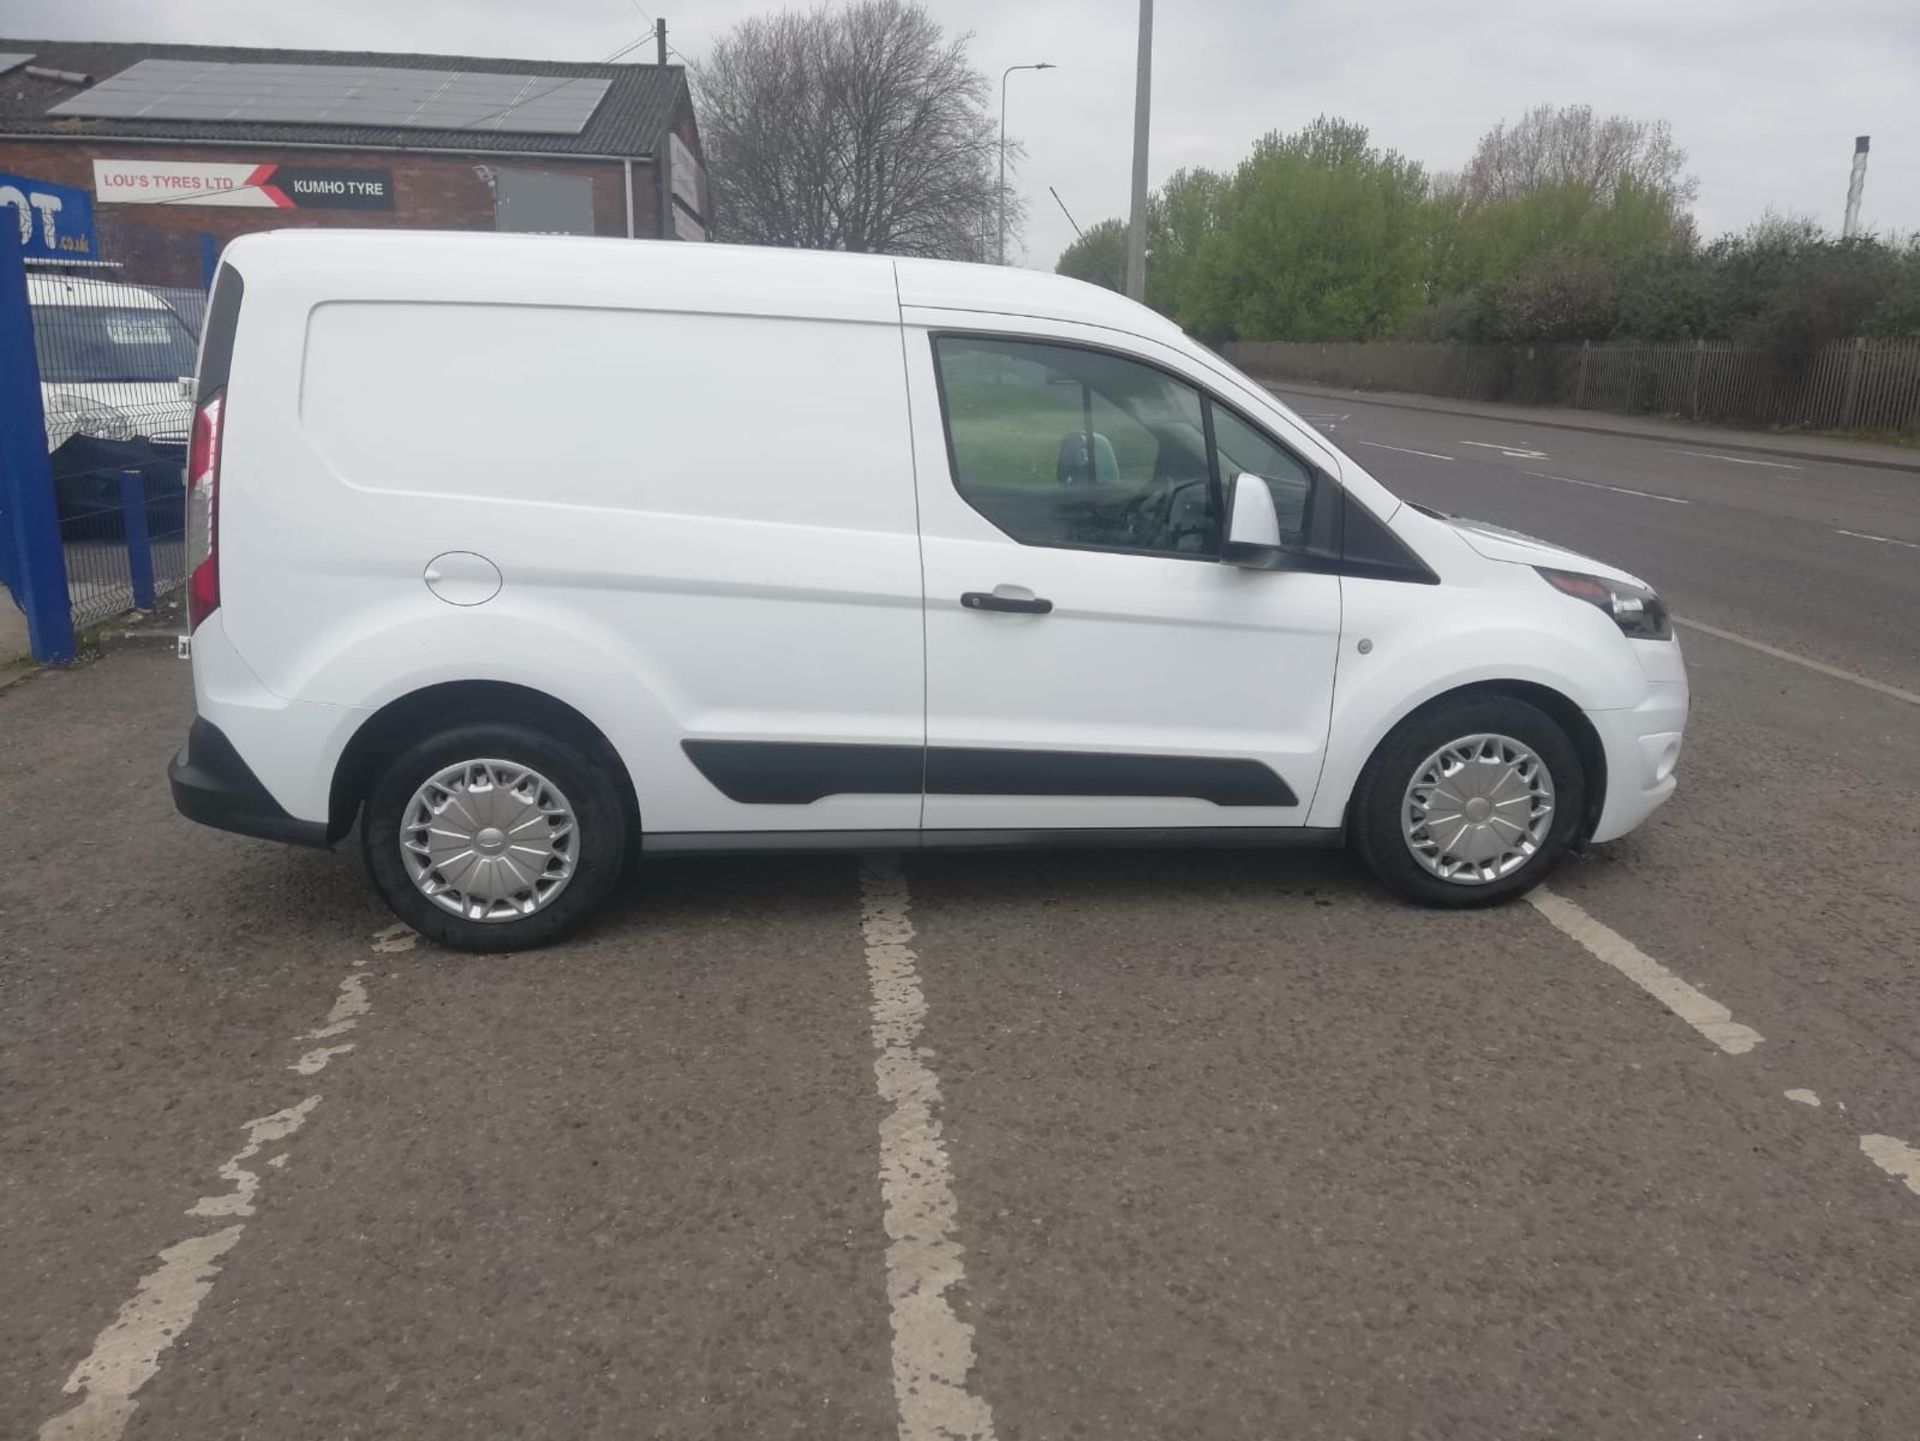 2017 17 FORD TRANSIT CONNECT PANEL VAN - EURO 6 - 145K MILES - PLY LINED. - Image 8 of 10